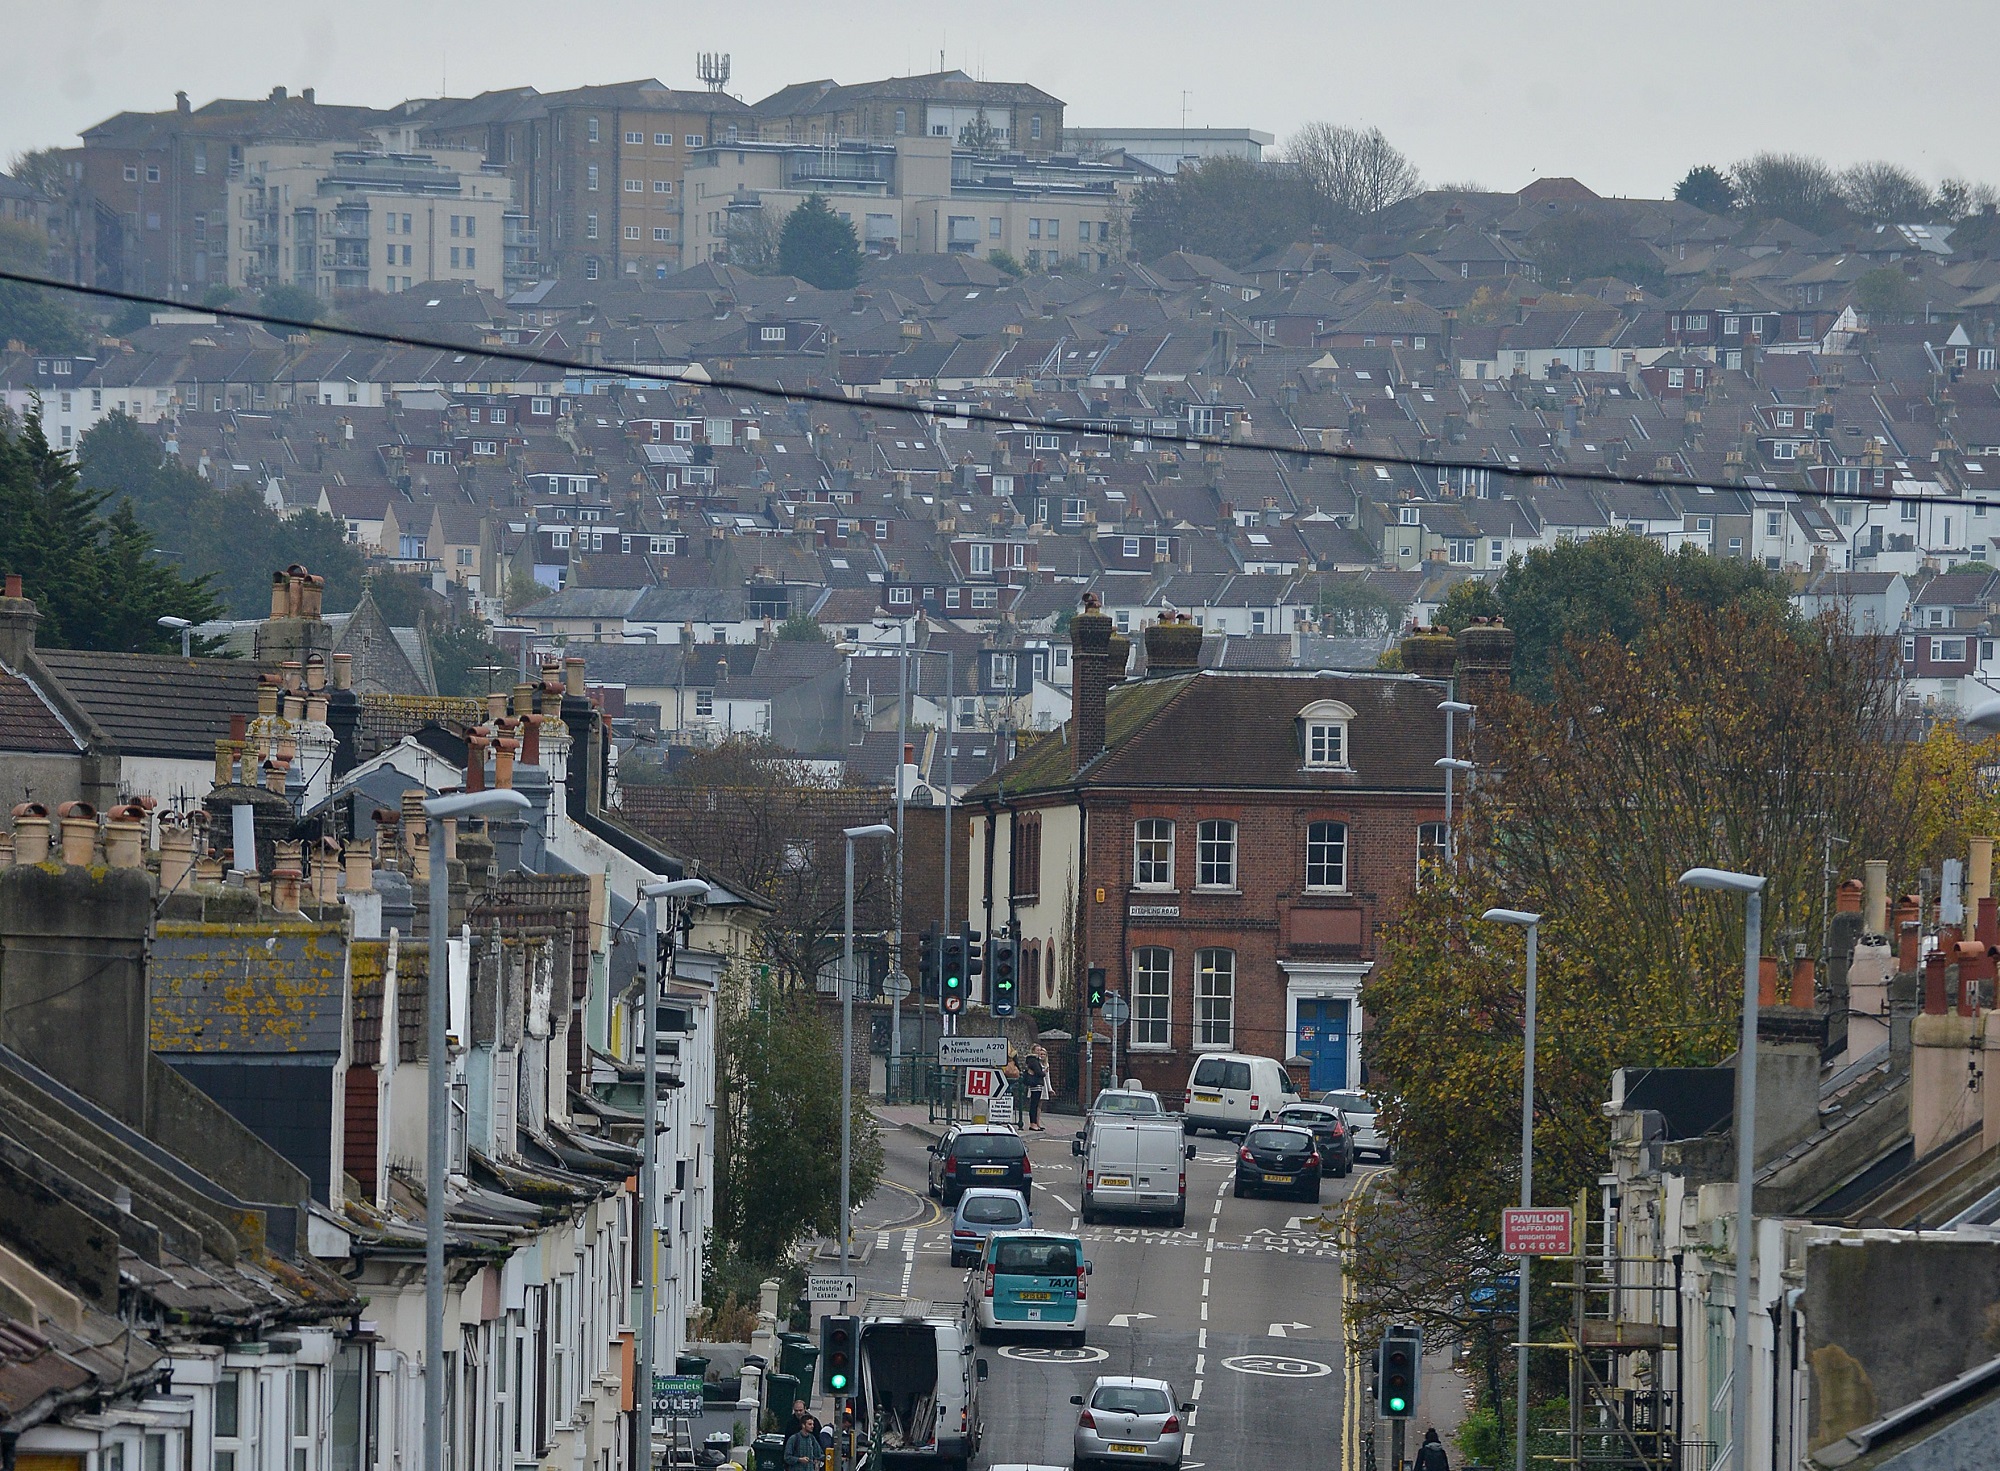 £24m cuts for Brighton and Hove could make for 'most difficult year ever'